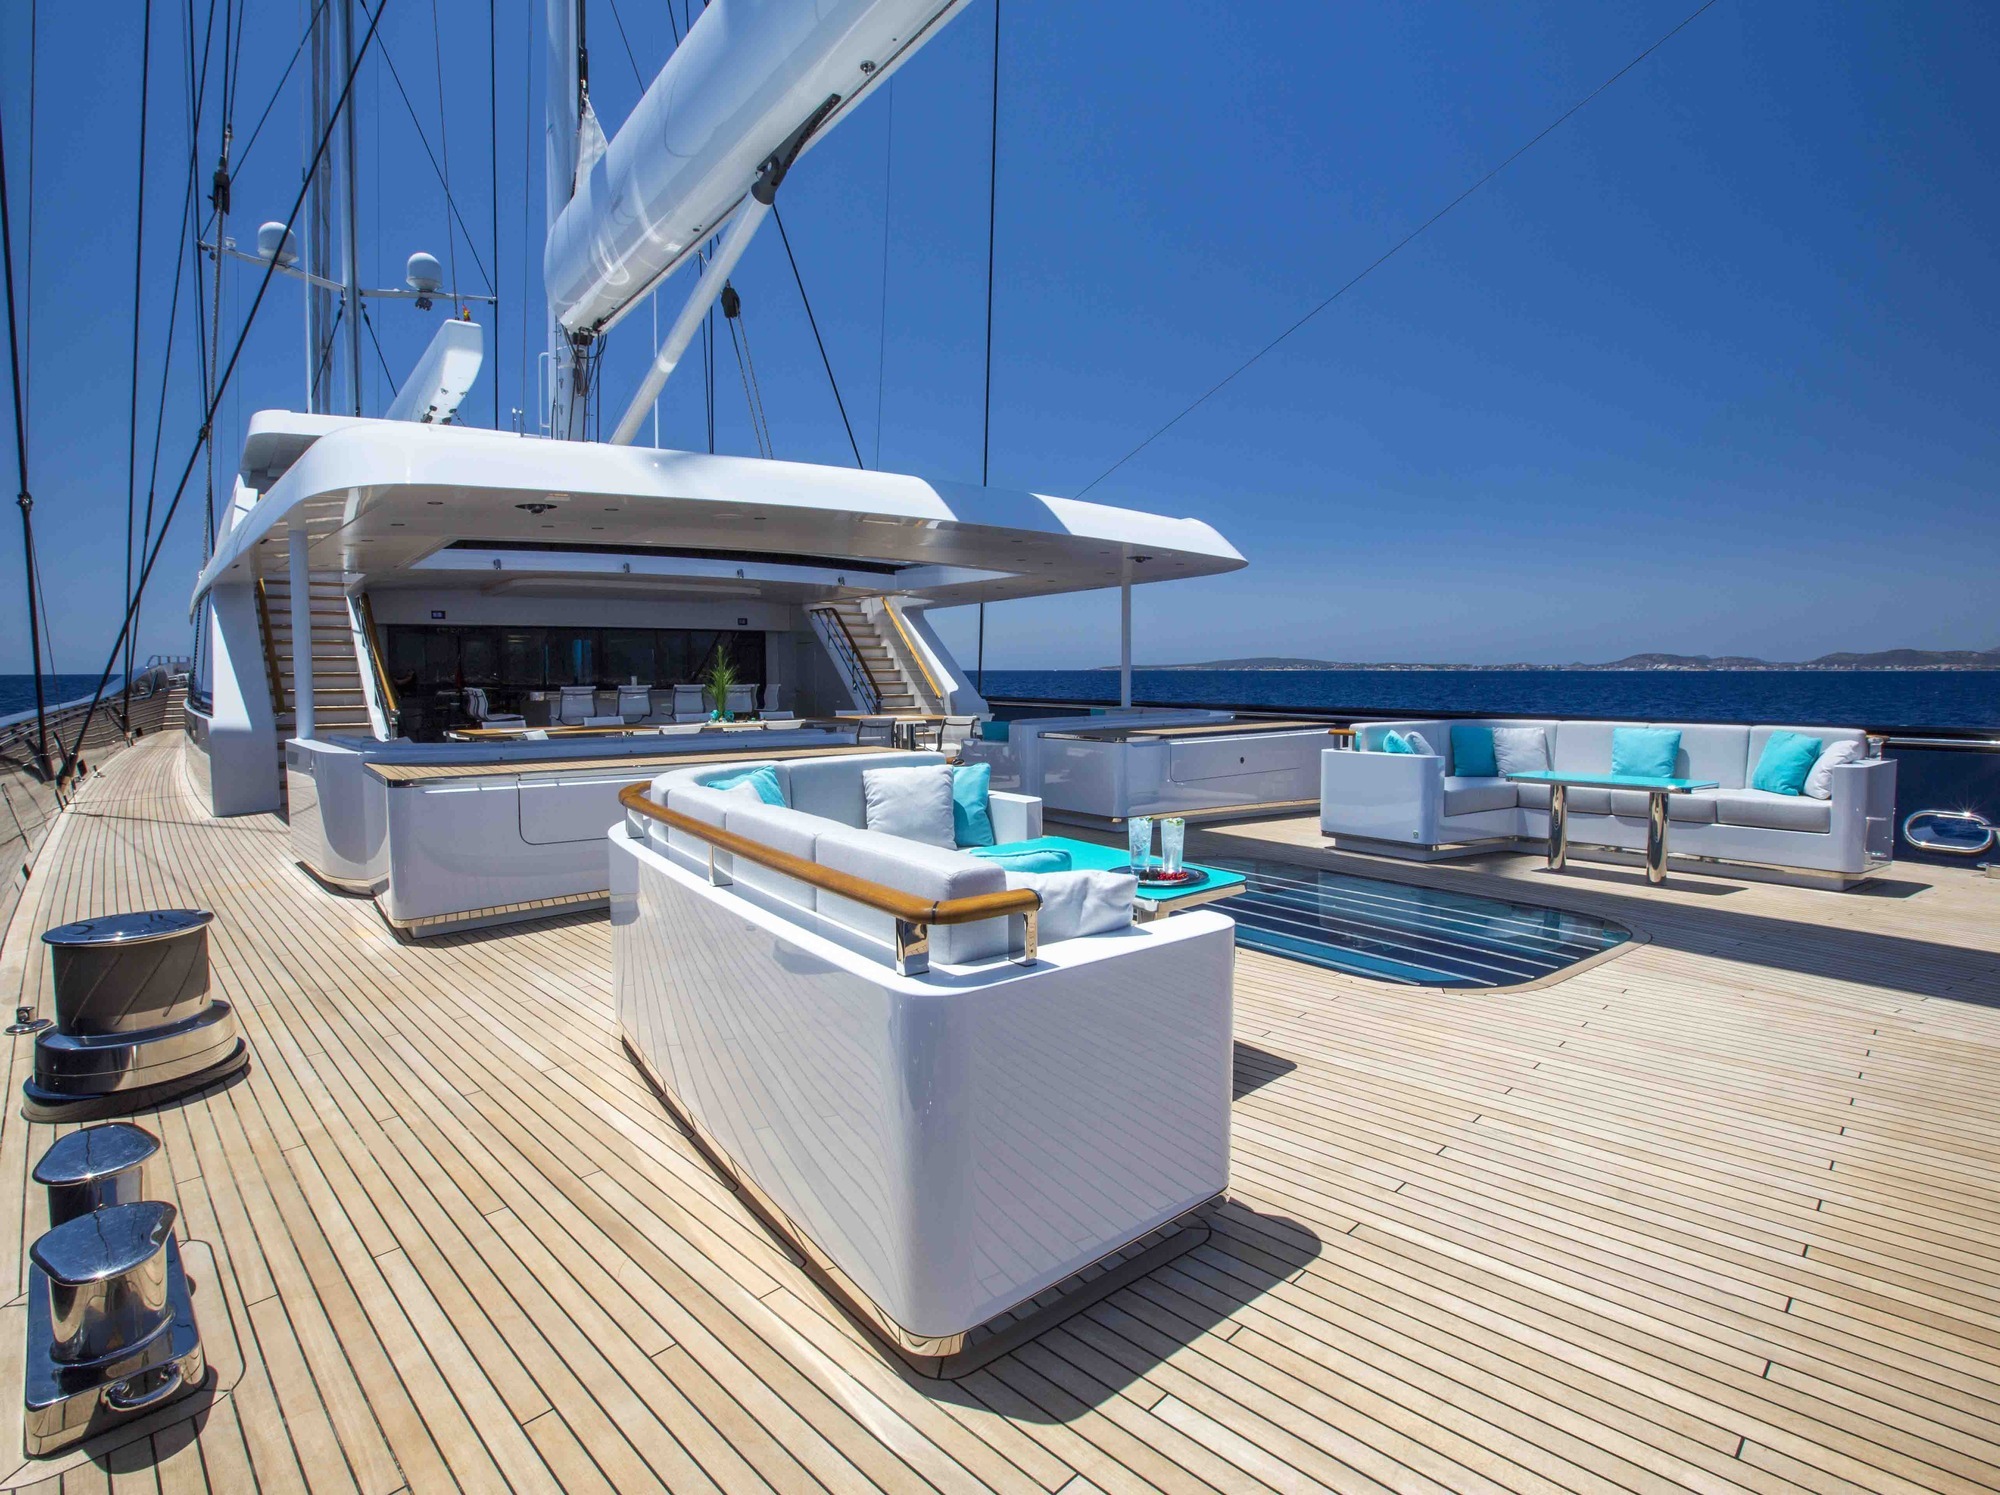 Aft Deck Relaxation Area With Seating And Tables